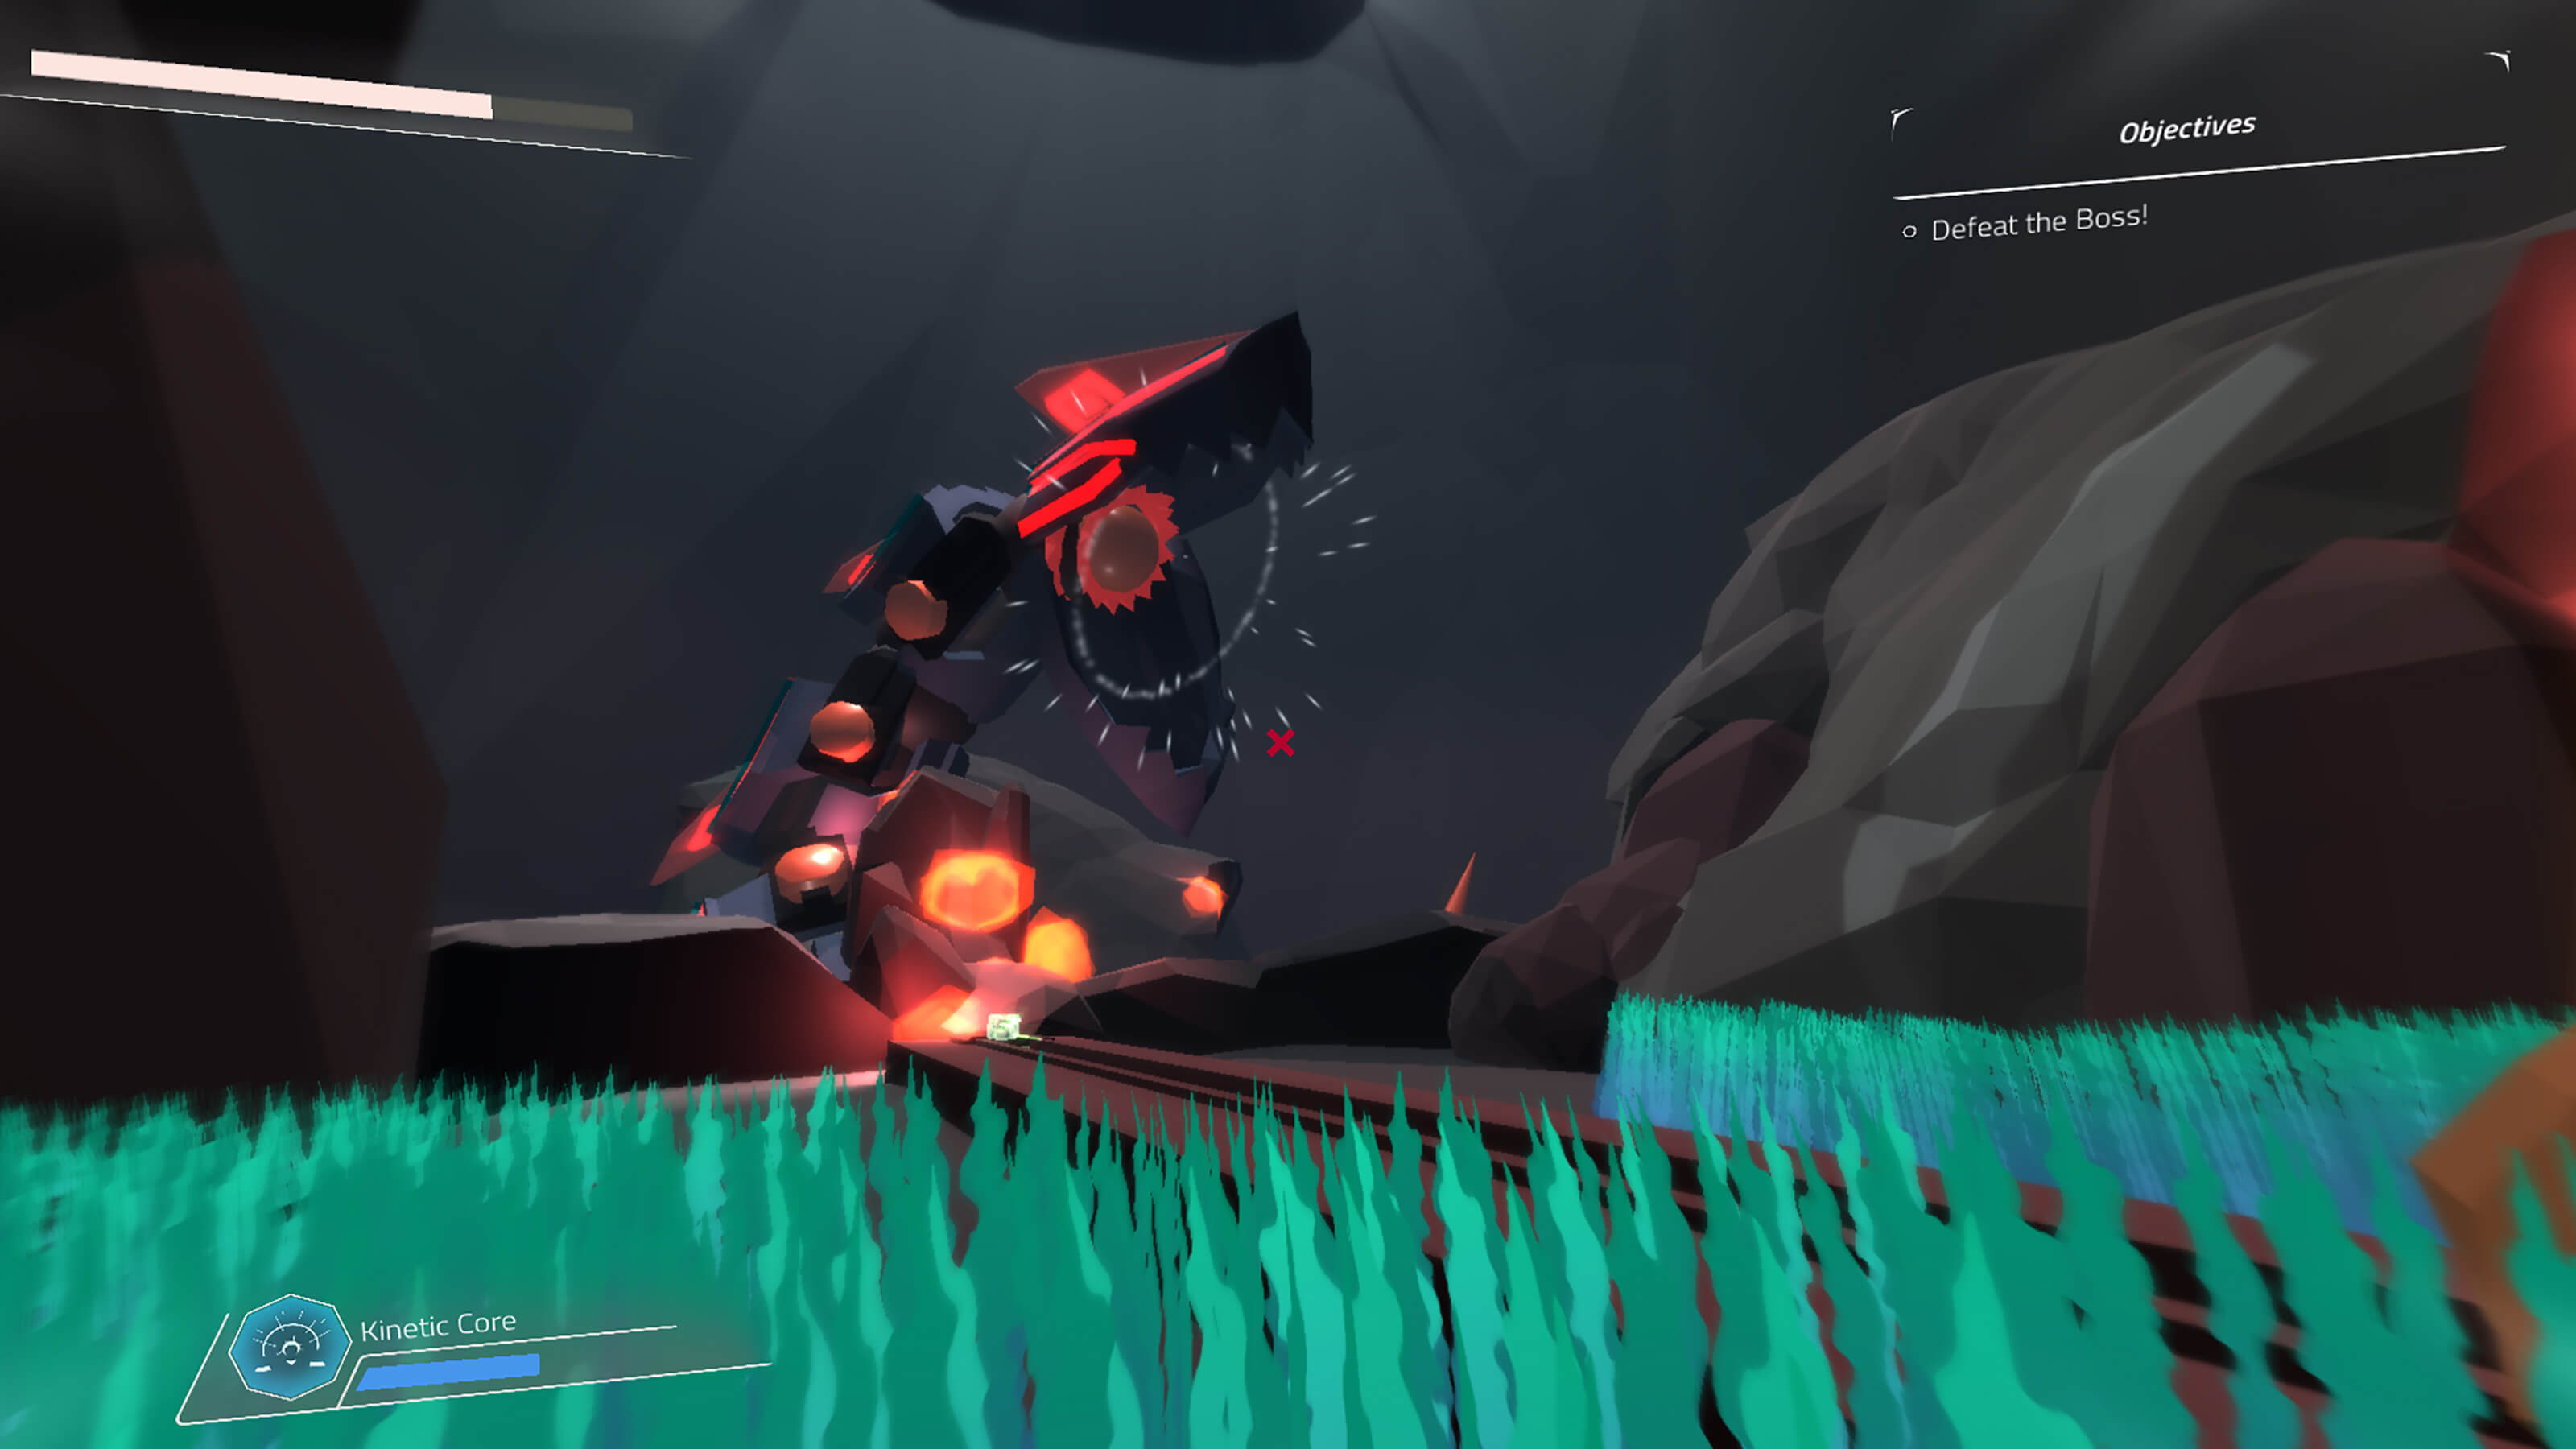 In an underground cavern, the player sees a segmented beast with metallic jaws in the distance.